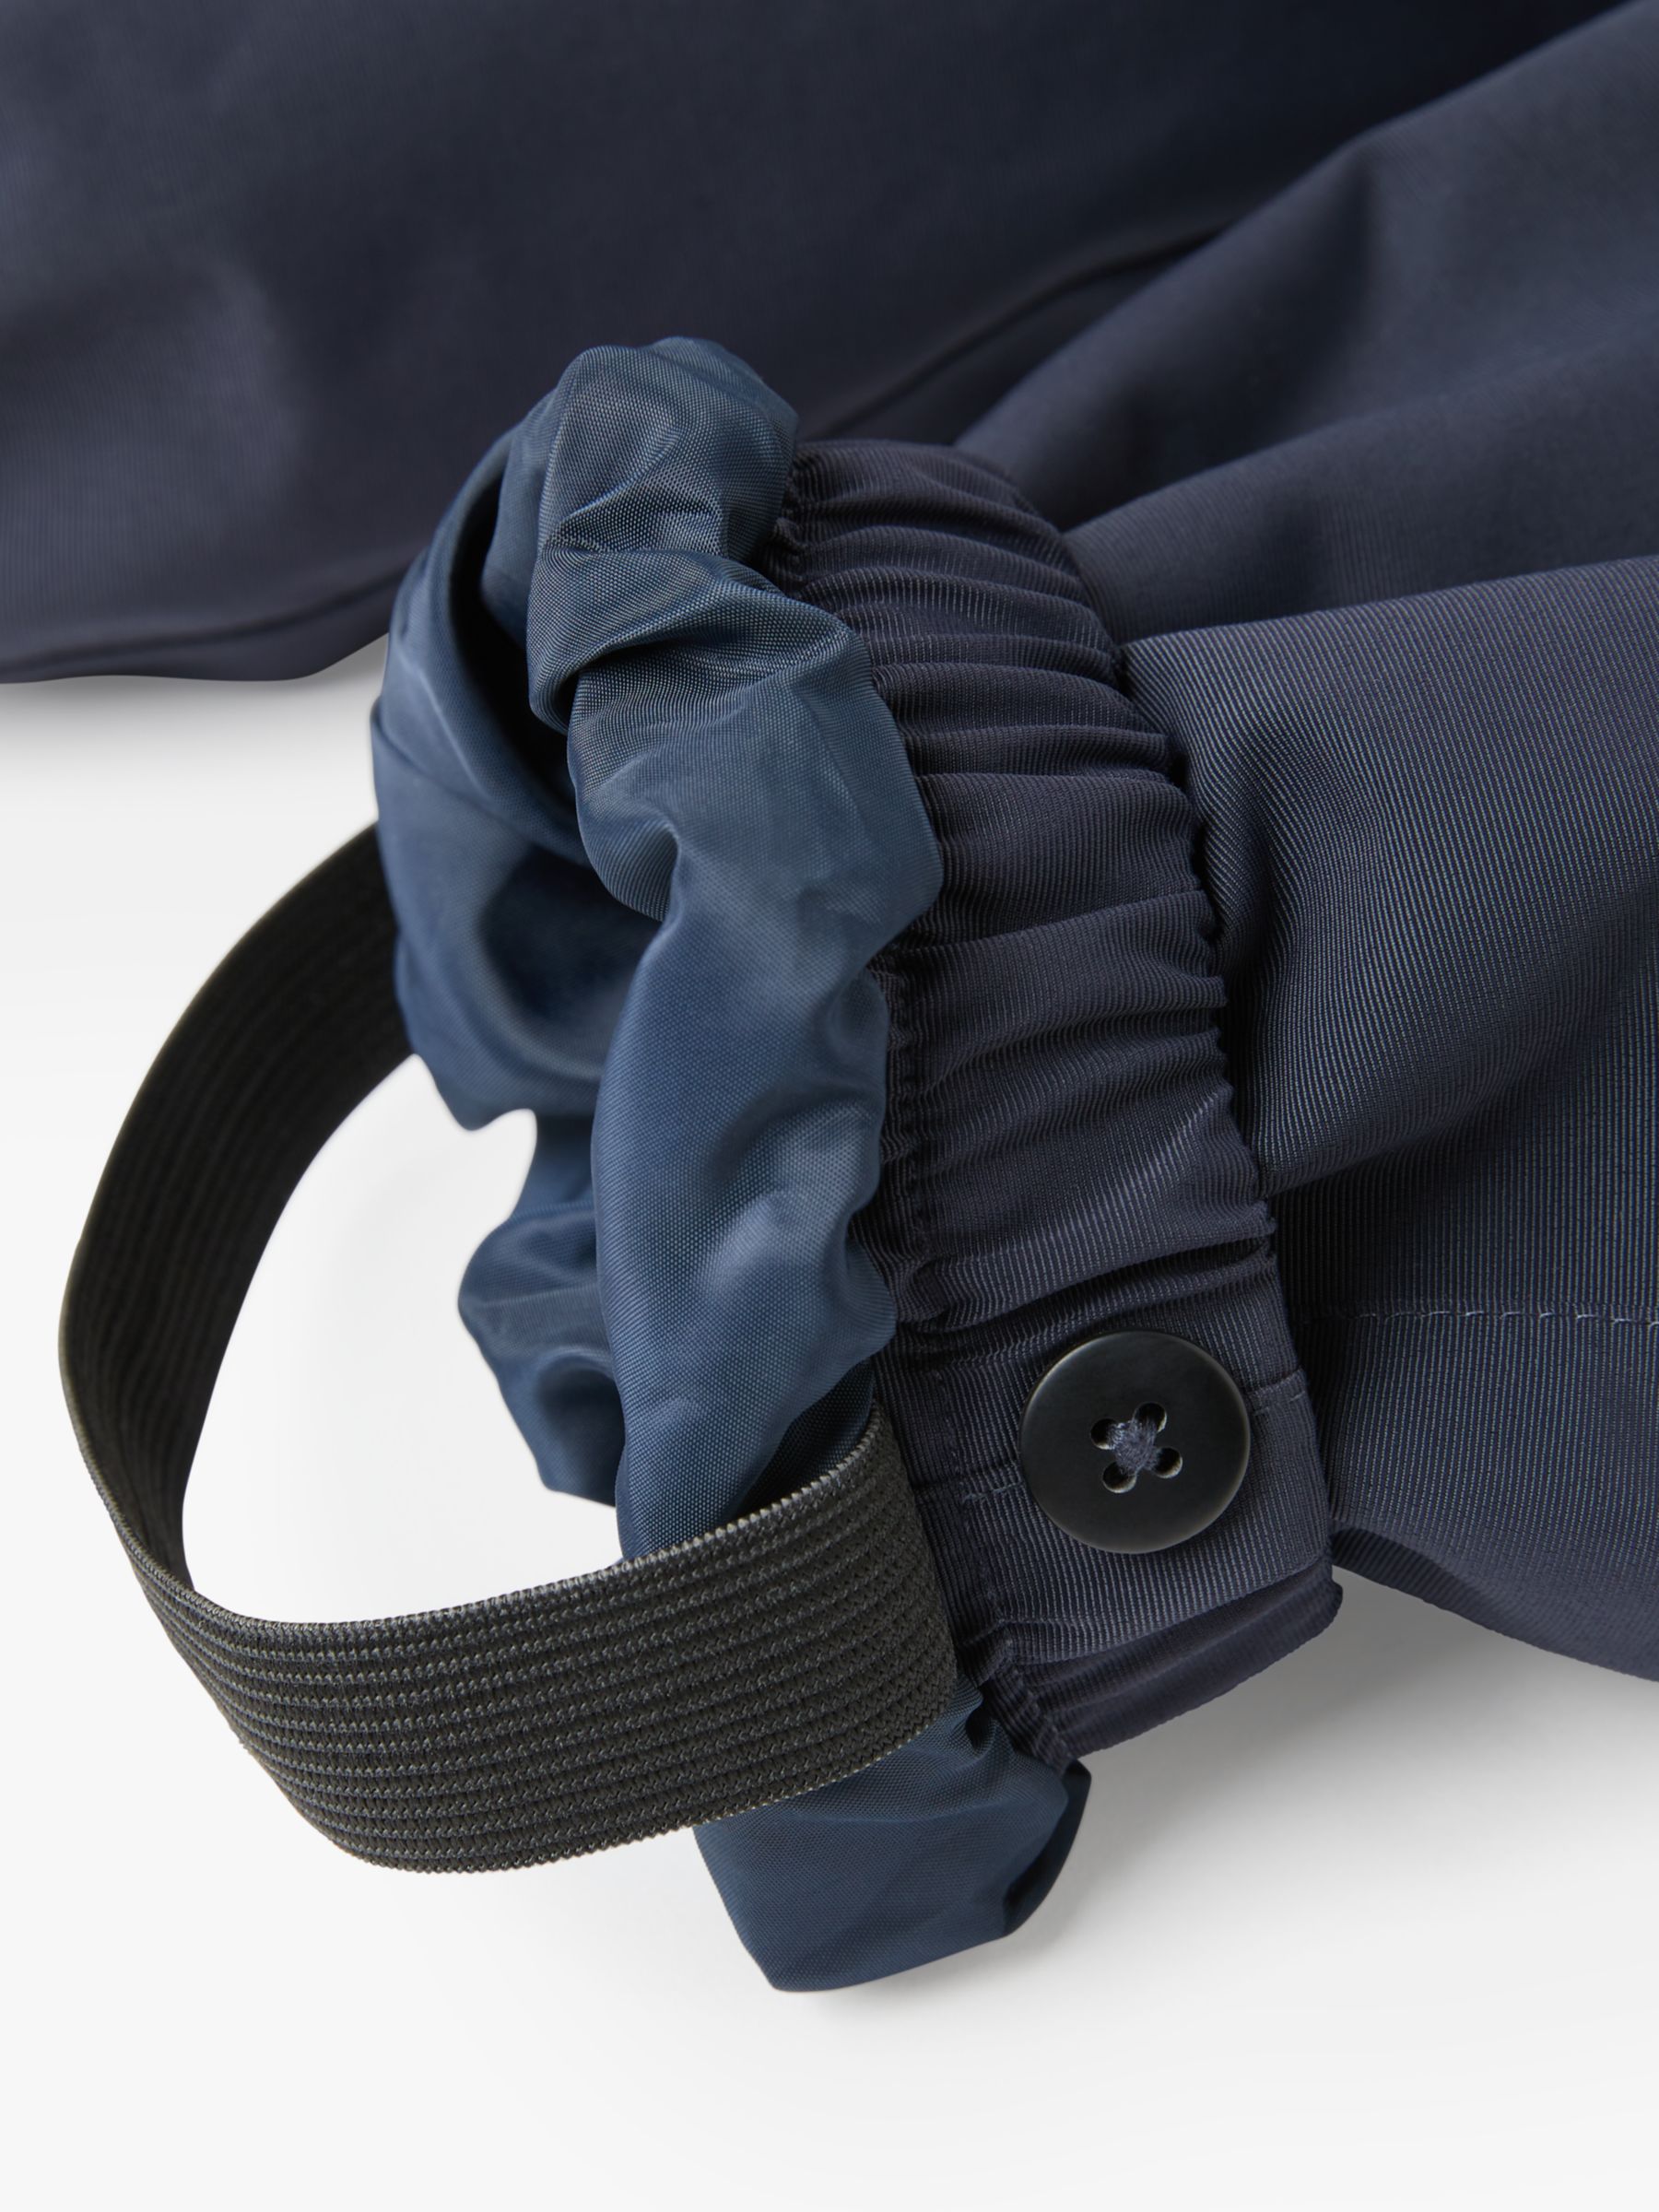 Buy Polarn O. Pyret Baby Shell High-Waist Windproof Waterproof Salopettes Online at johnlewis.com